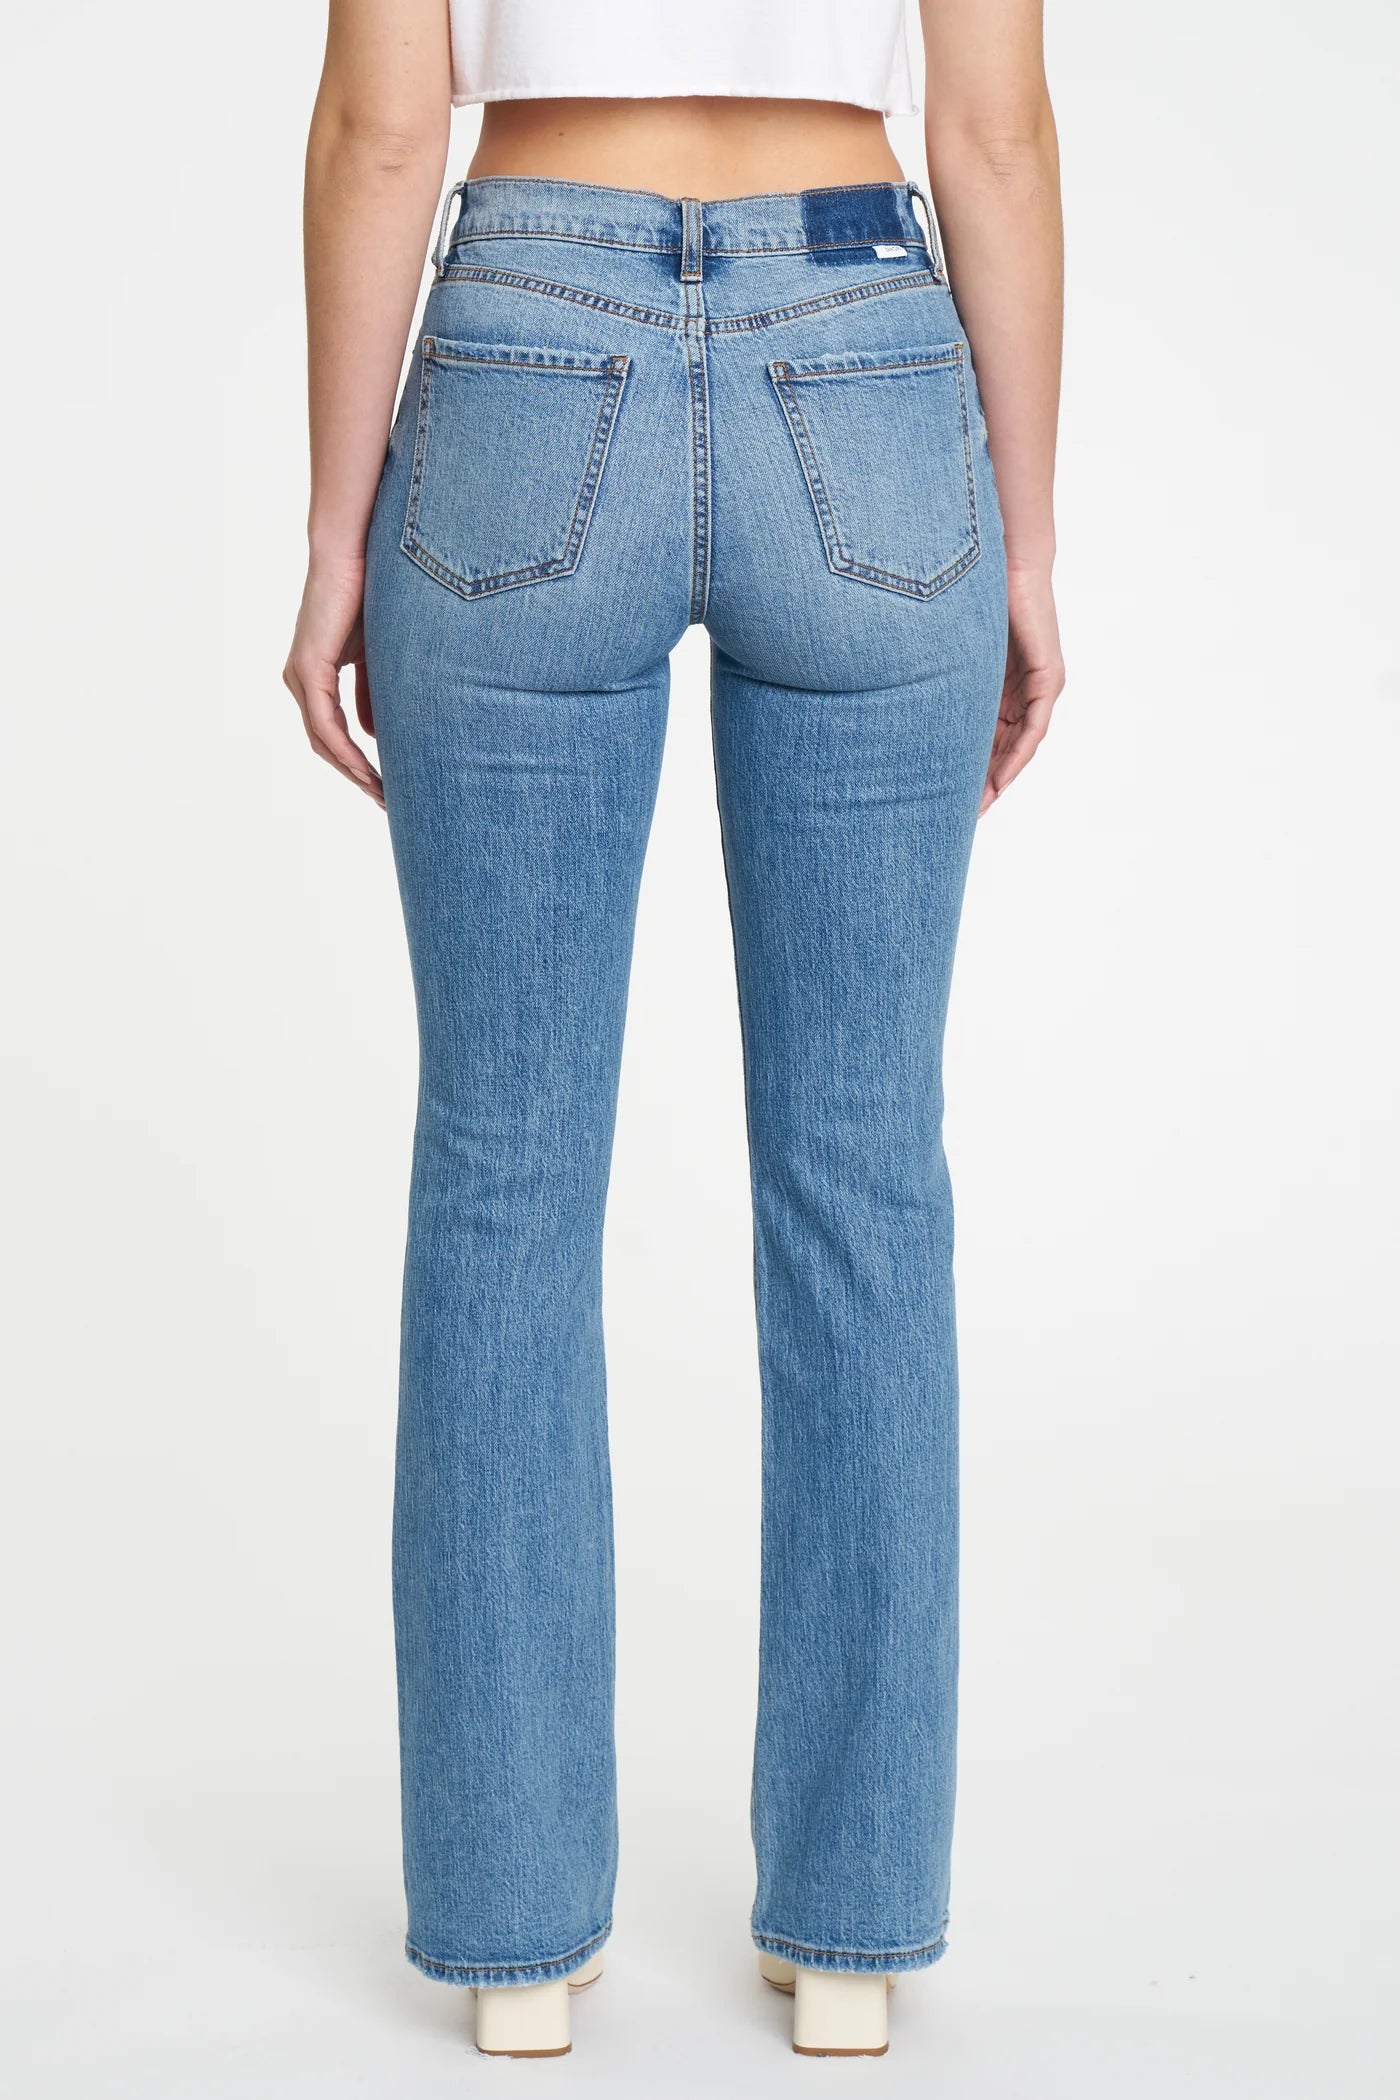 Darling! Mid Rise Bootcut